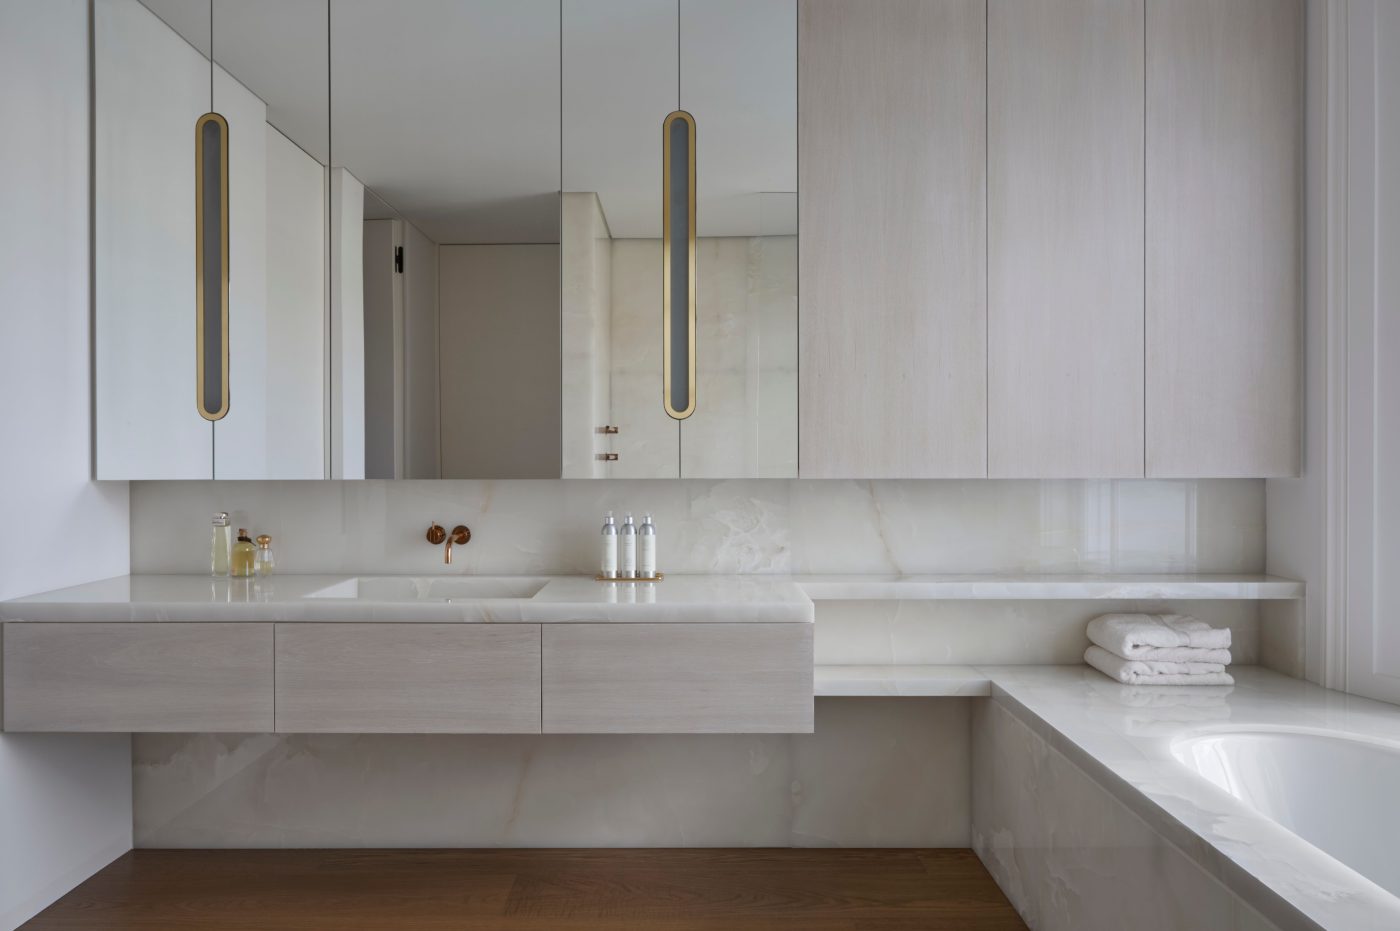 Bathroom designed by Peter Mikic